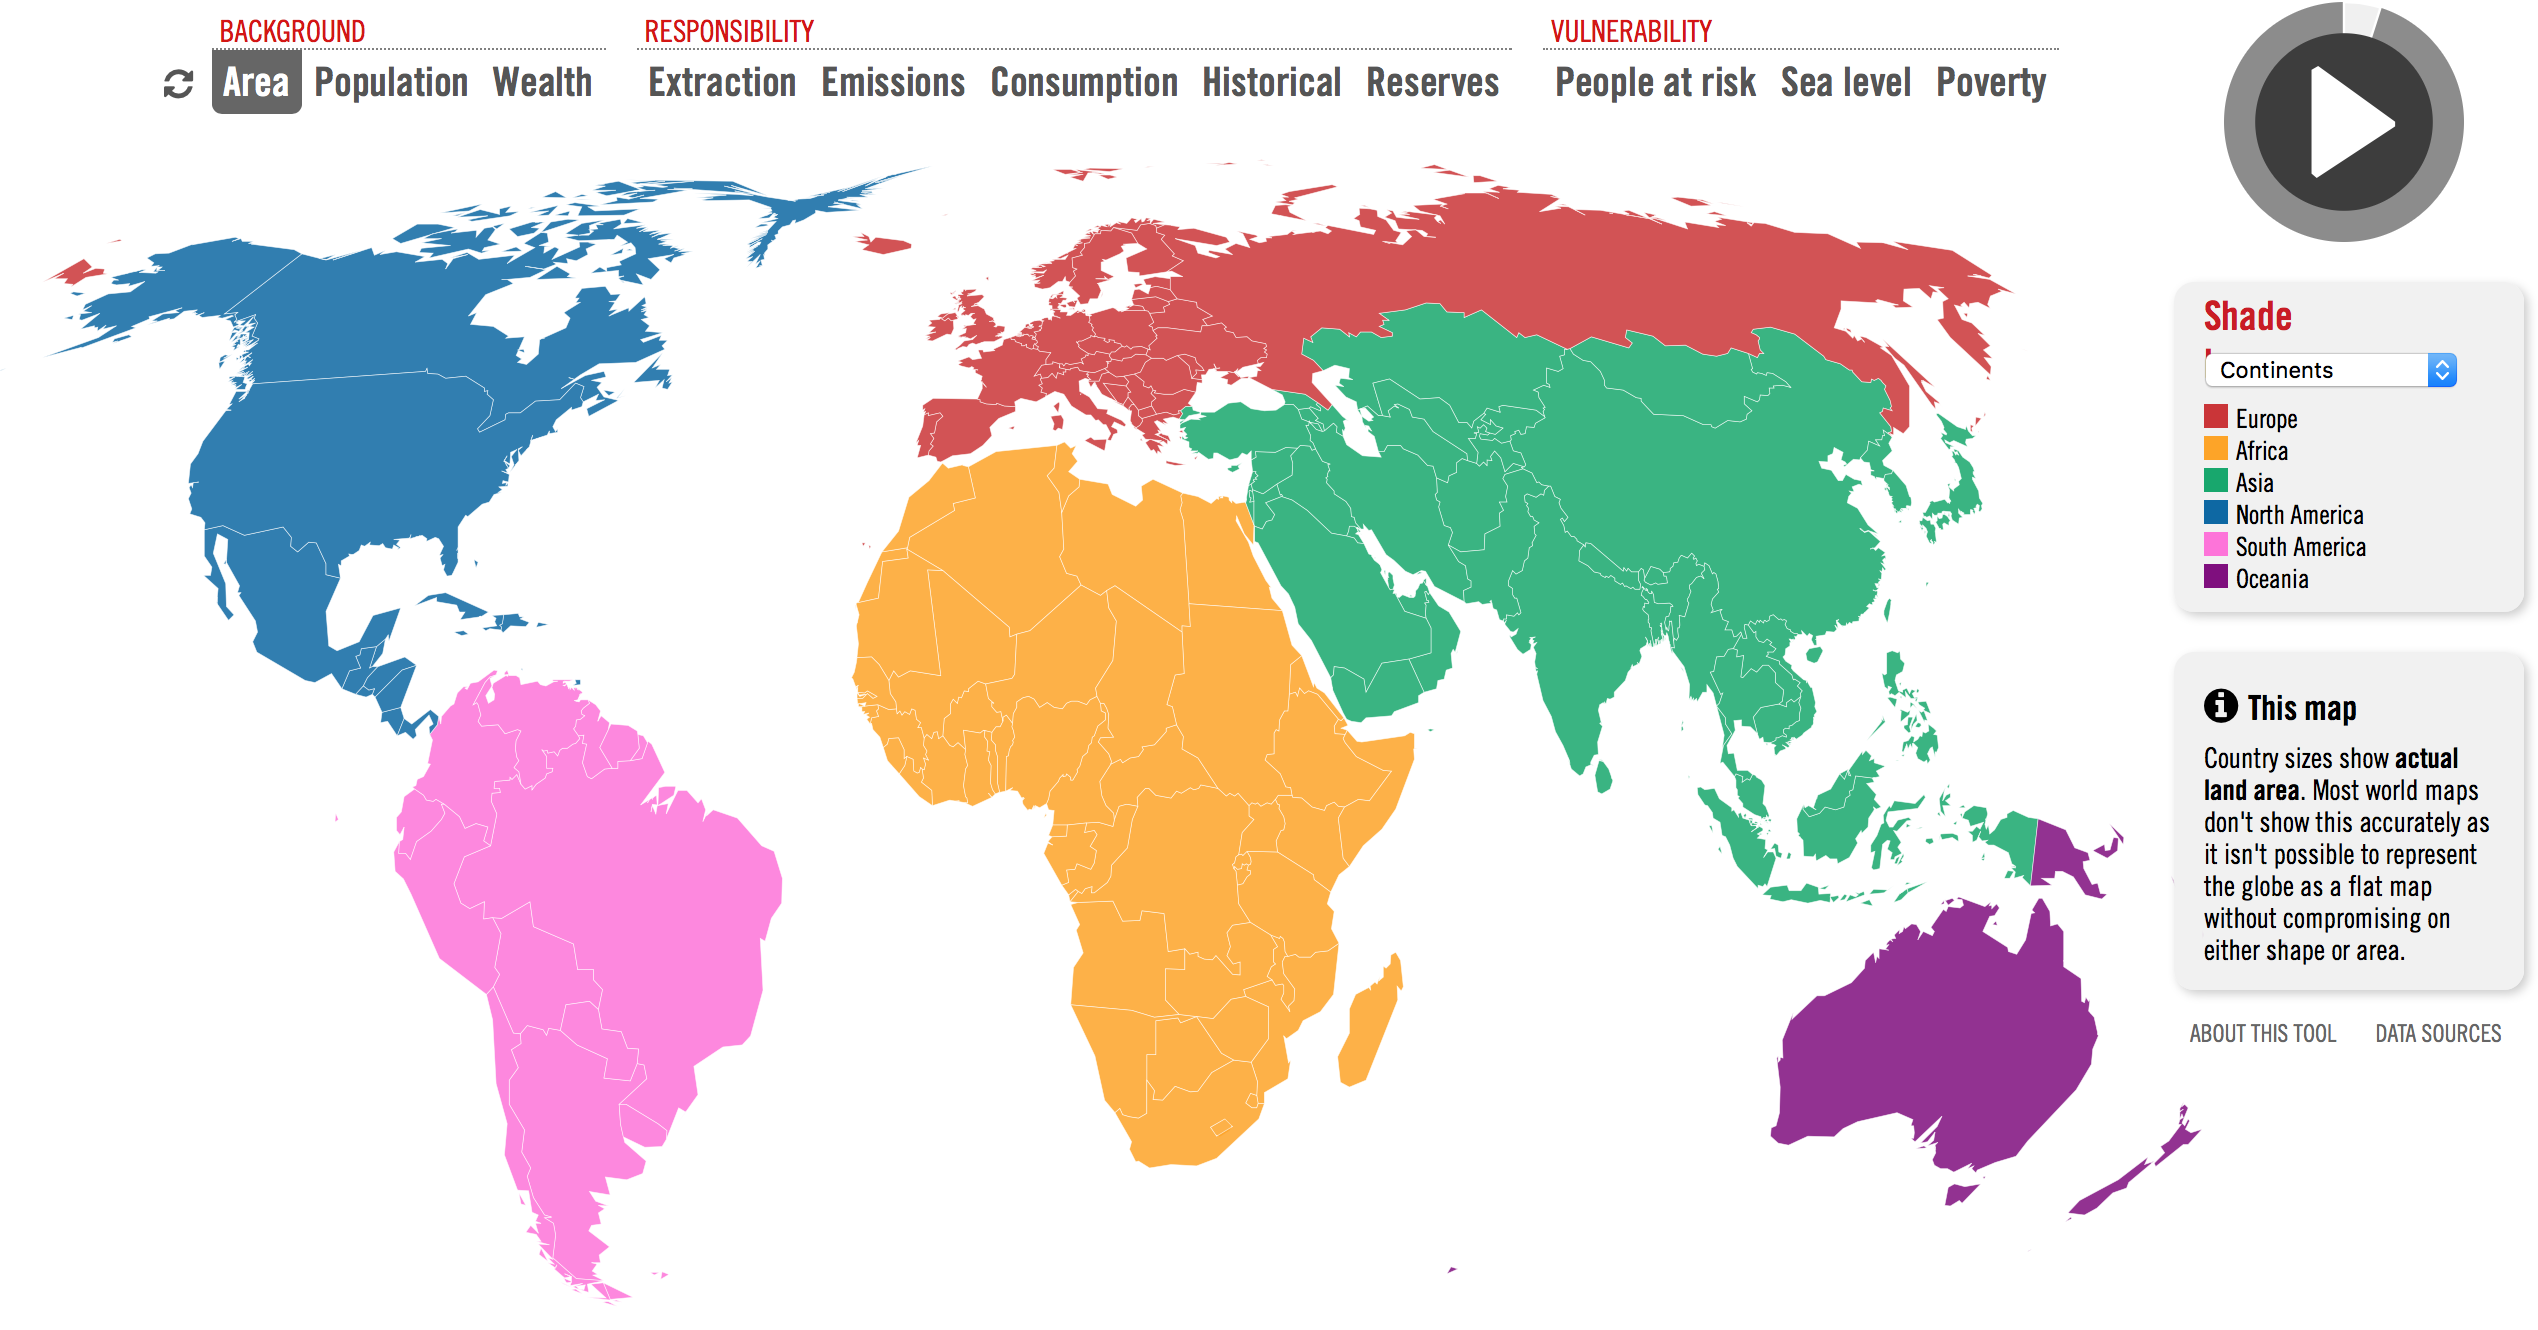 What people live on the continent. Carbon emissions Map. Map without Continents. Actual Country Sizes Map. Actual Size Map.